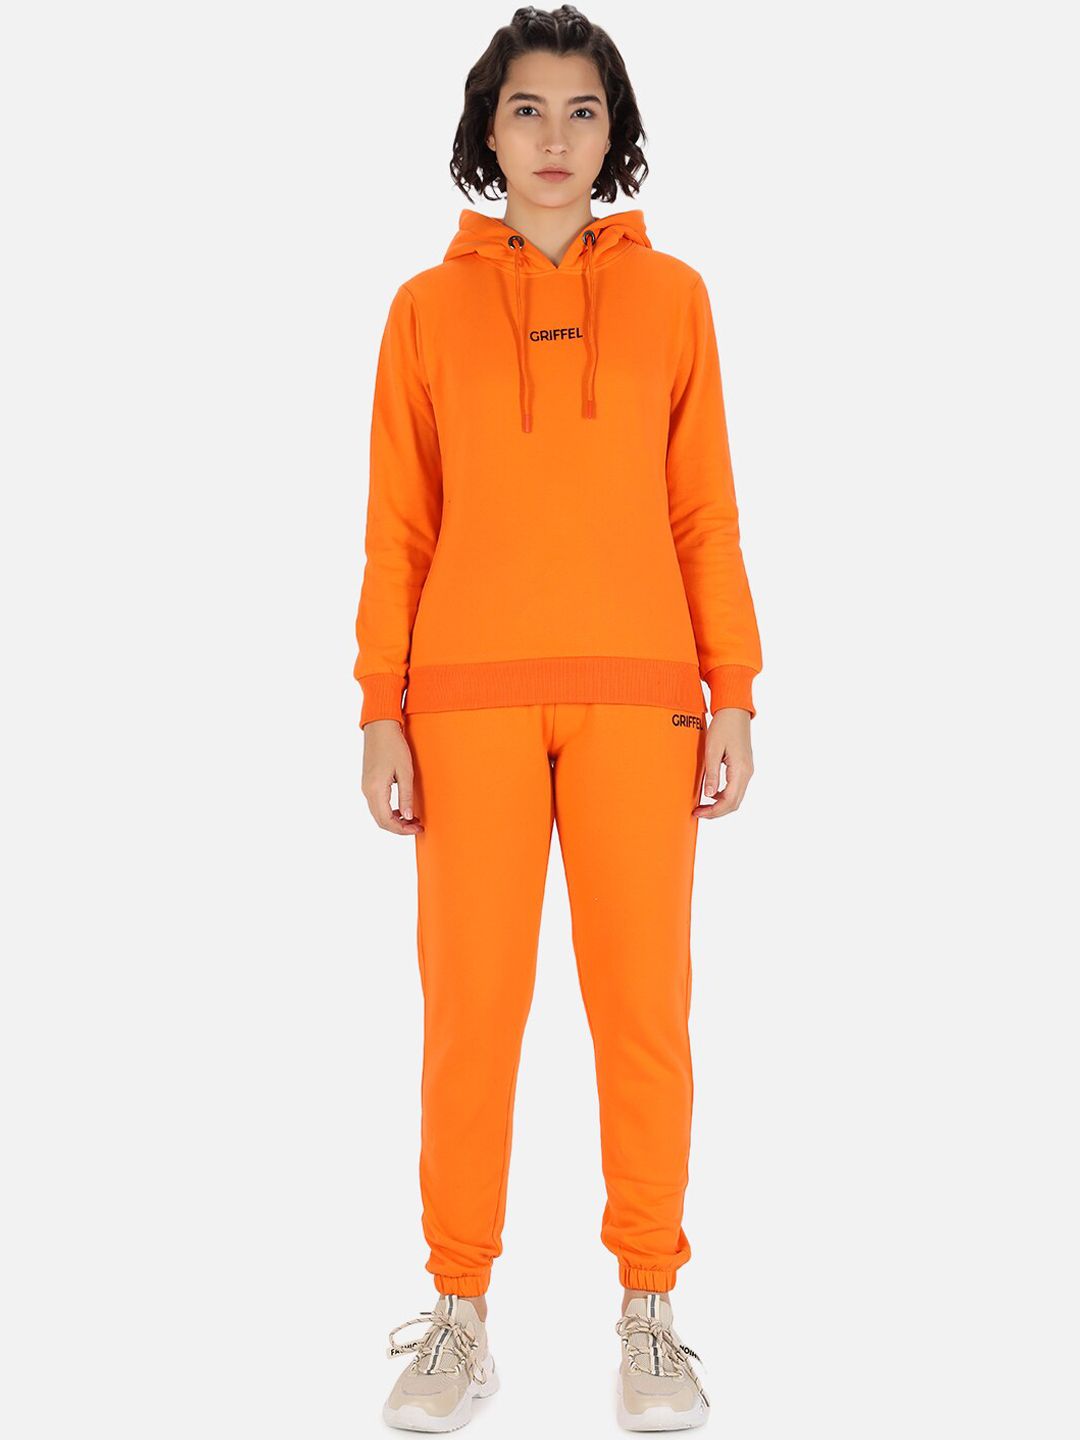 GRIFFEL Women Orange Solid Cotton Tracksuit Price in India